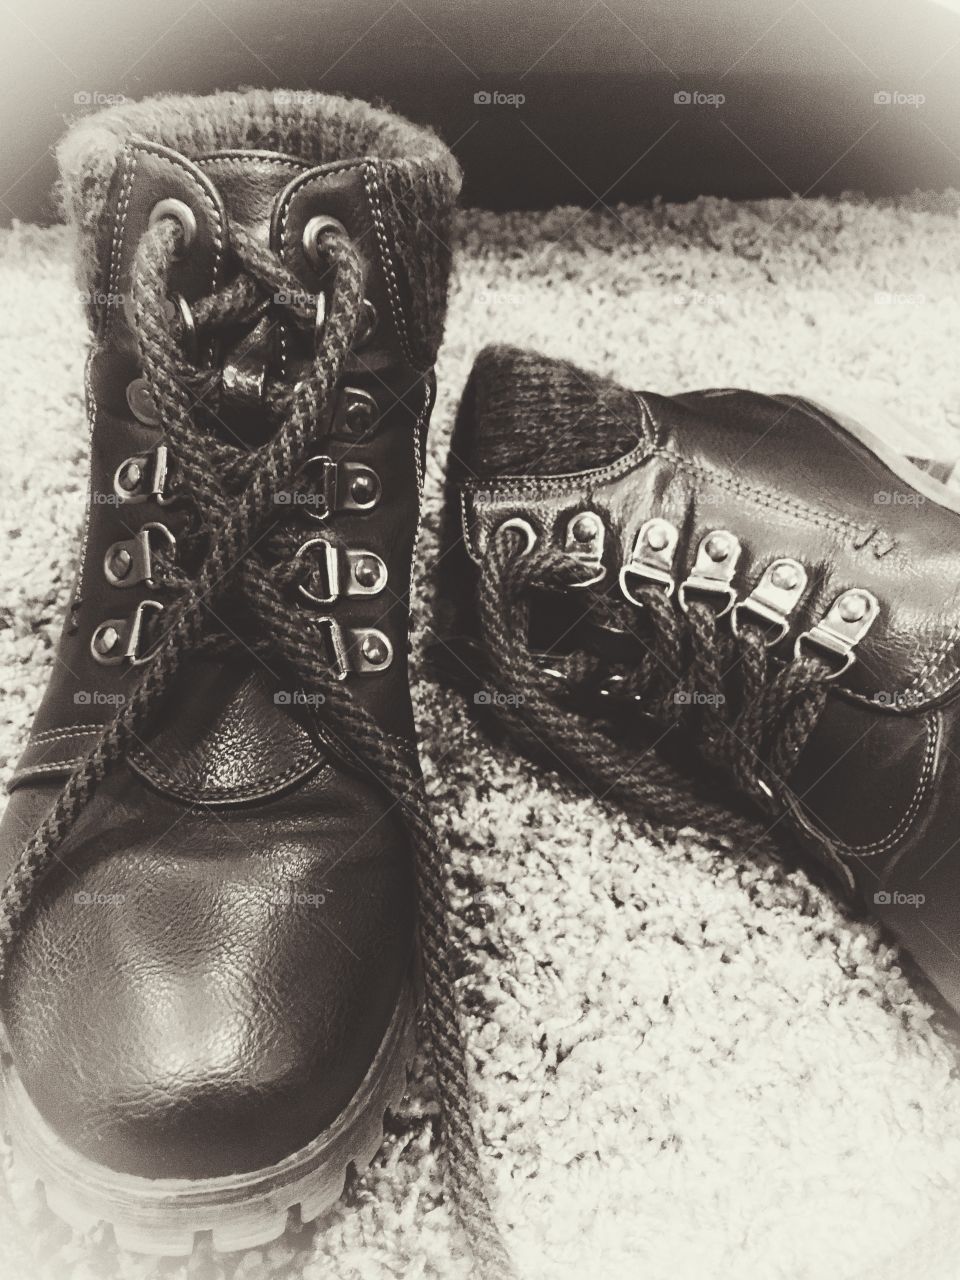 Boots in black and white 